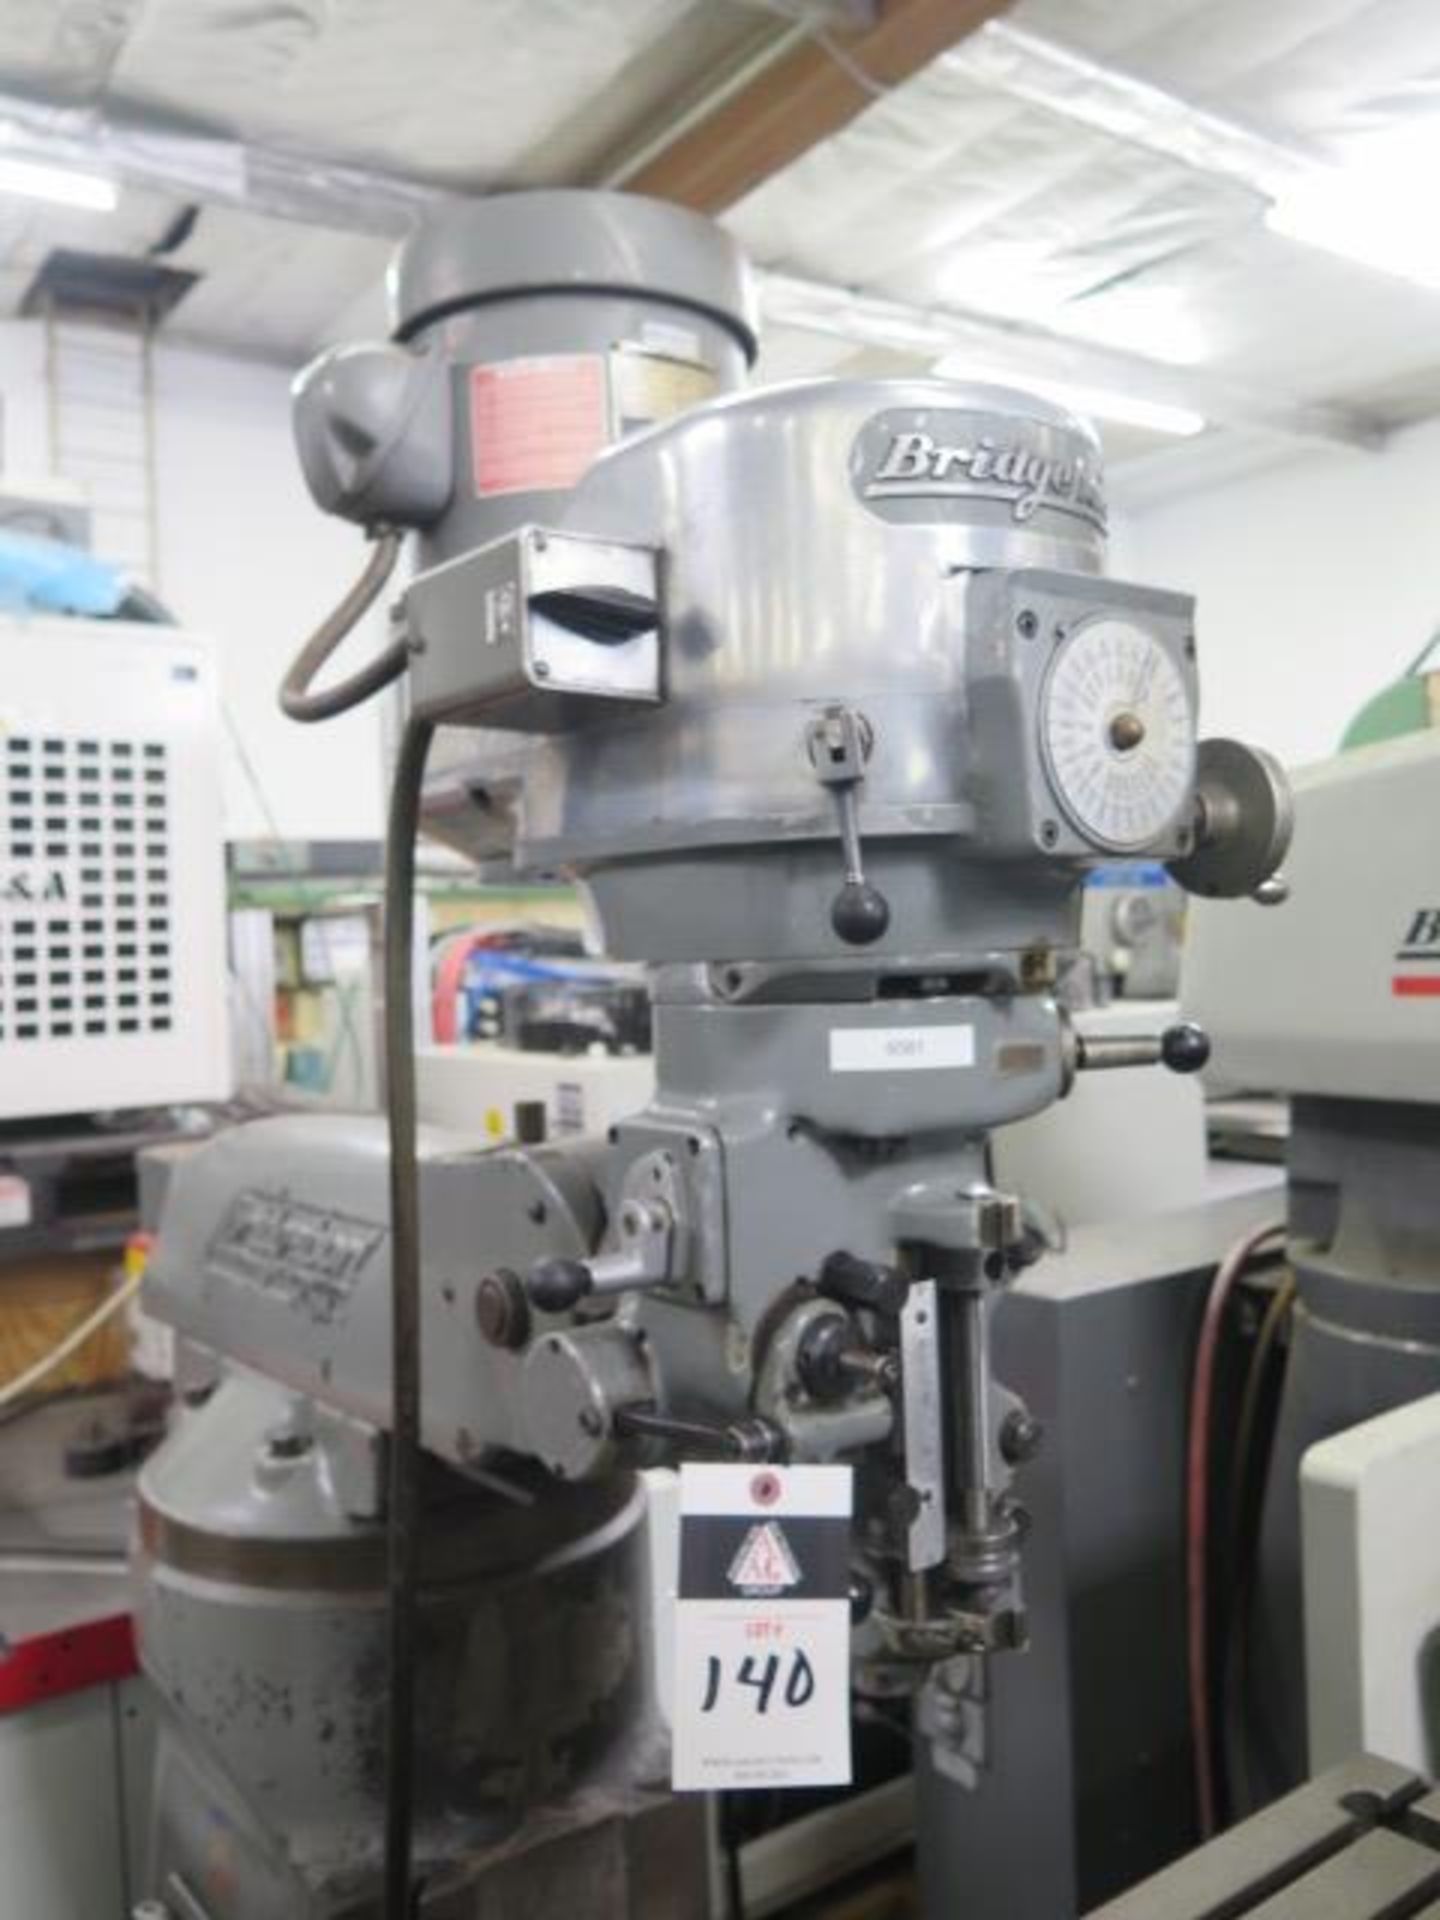 Bridgeport Vertical Mill w/ 1.5Hp Motor, 60-4200 Dial Chcnge RPM, Chrome Ways, 9" x 42" Table ( - Image 3 of 10